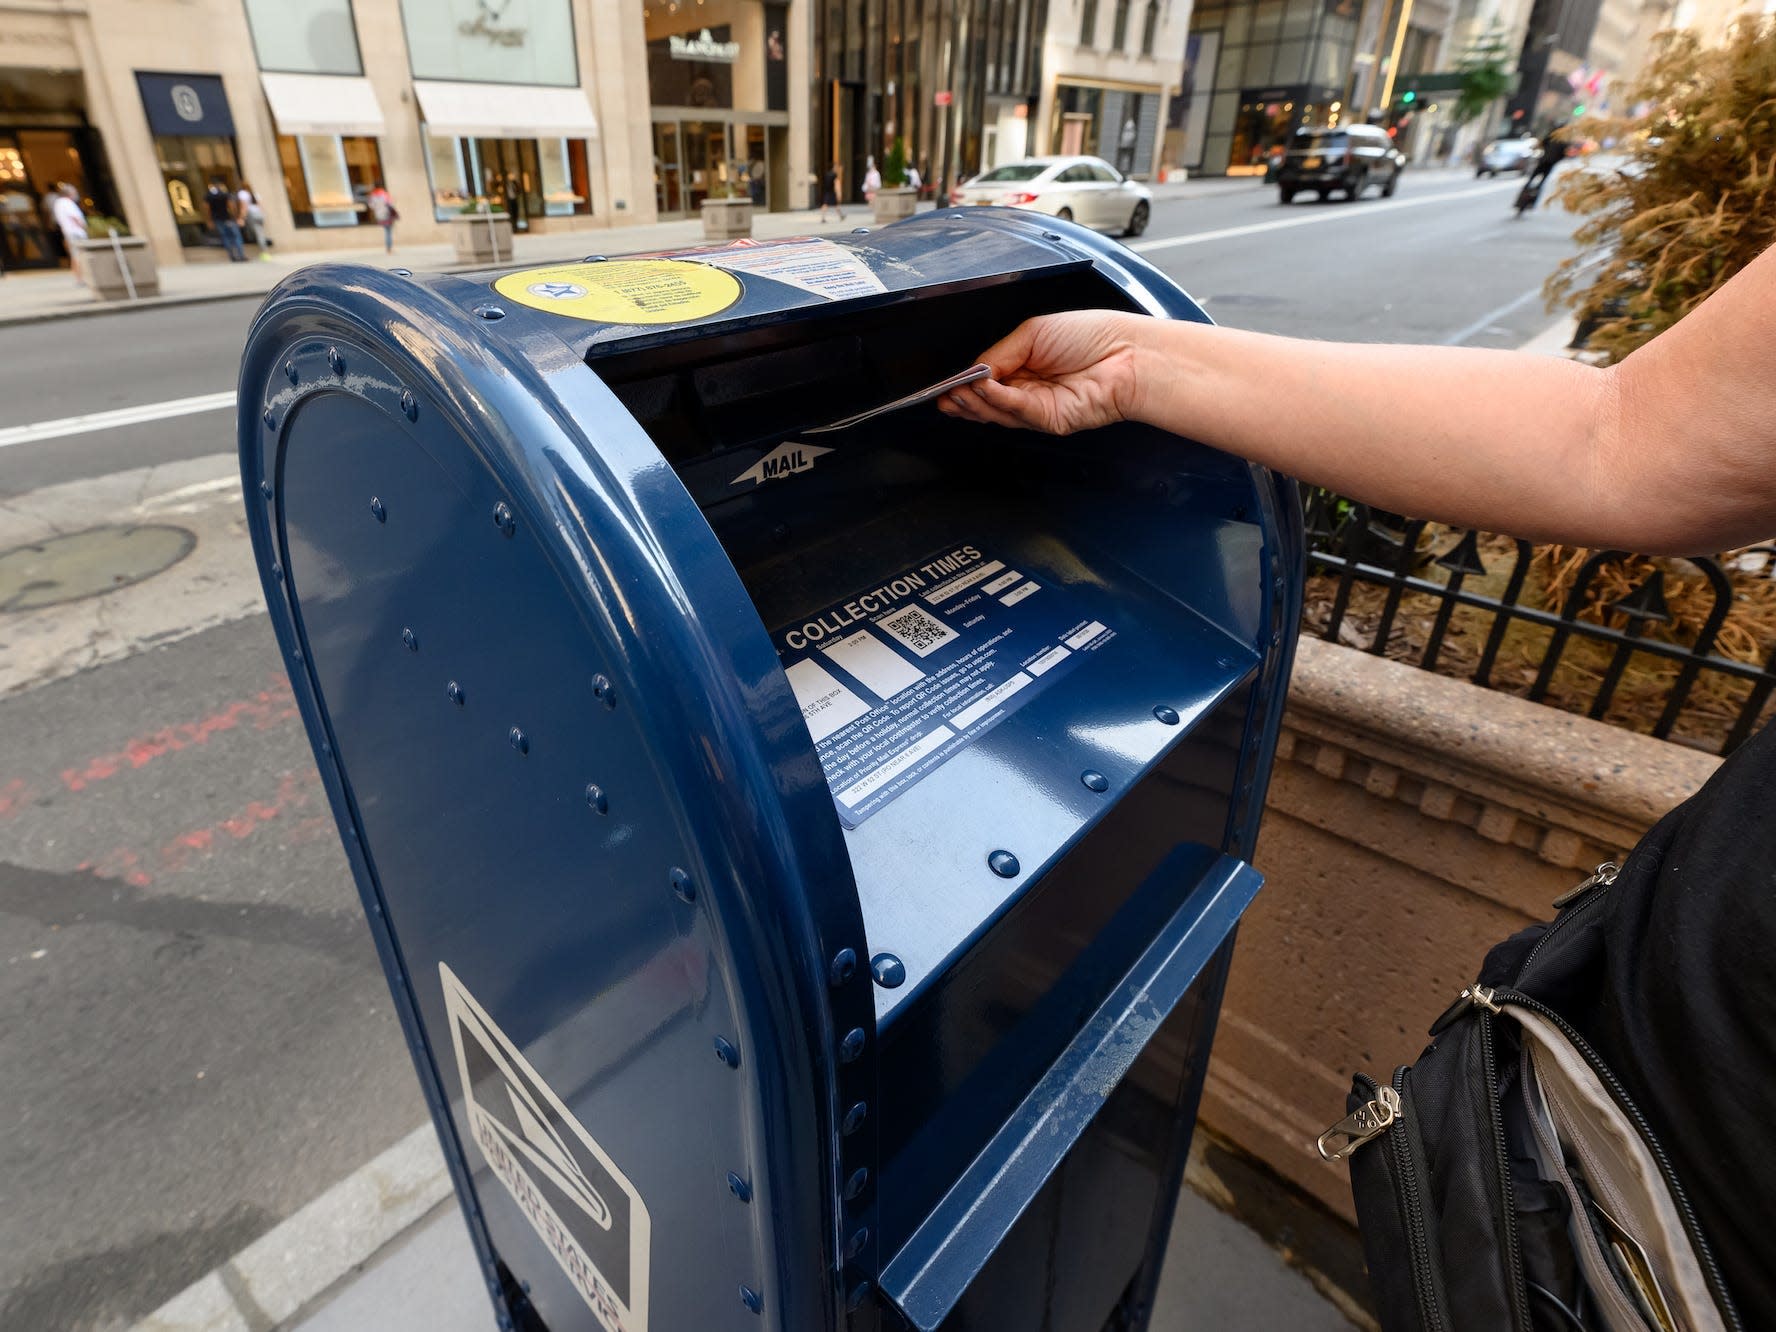 The USPS says it is removing mailboxes and suspending mail collection in several major cities before Biden’s inauguration.